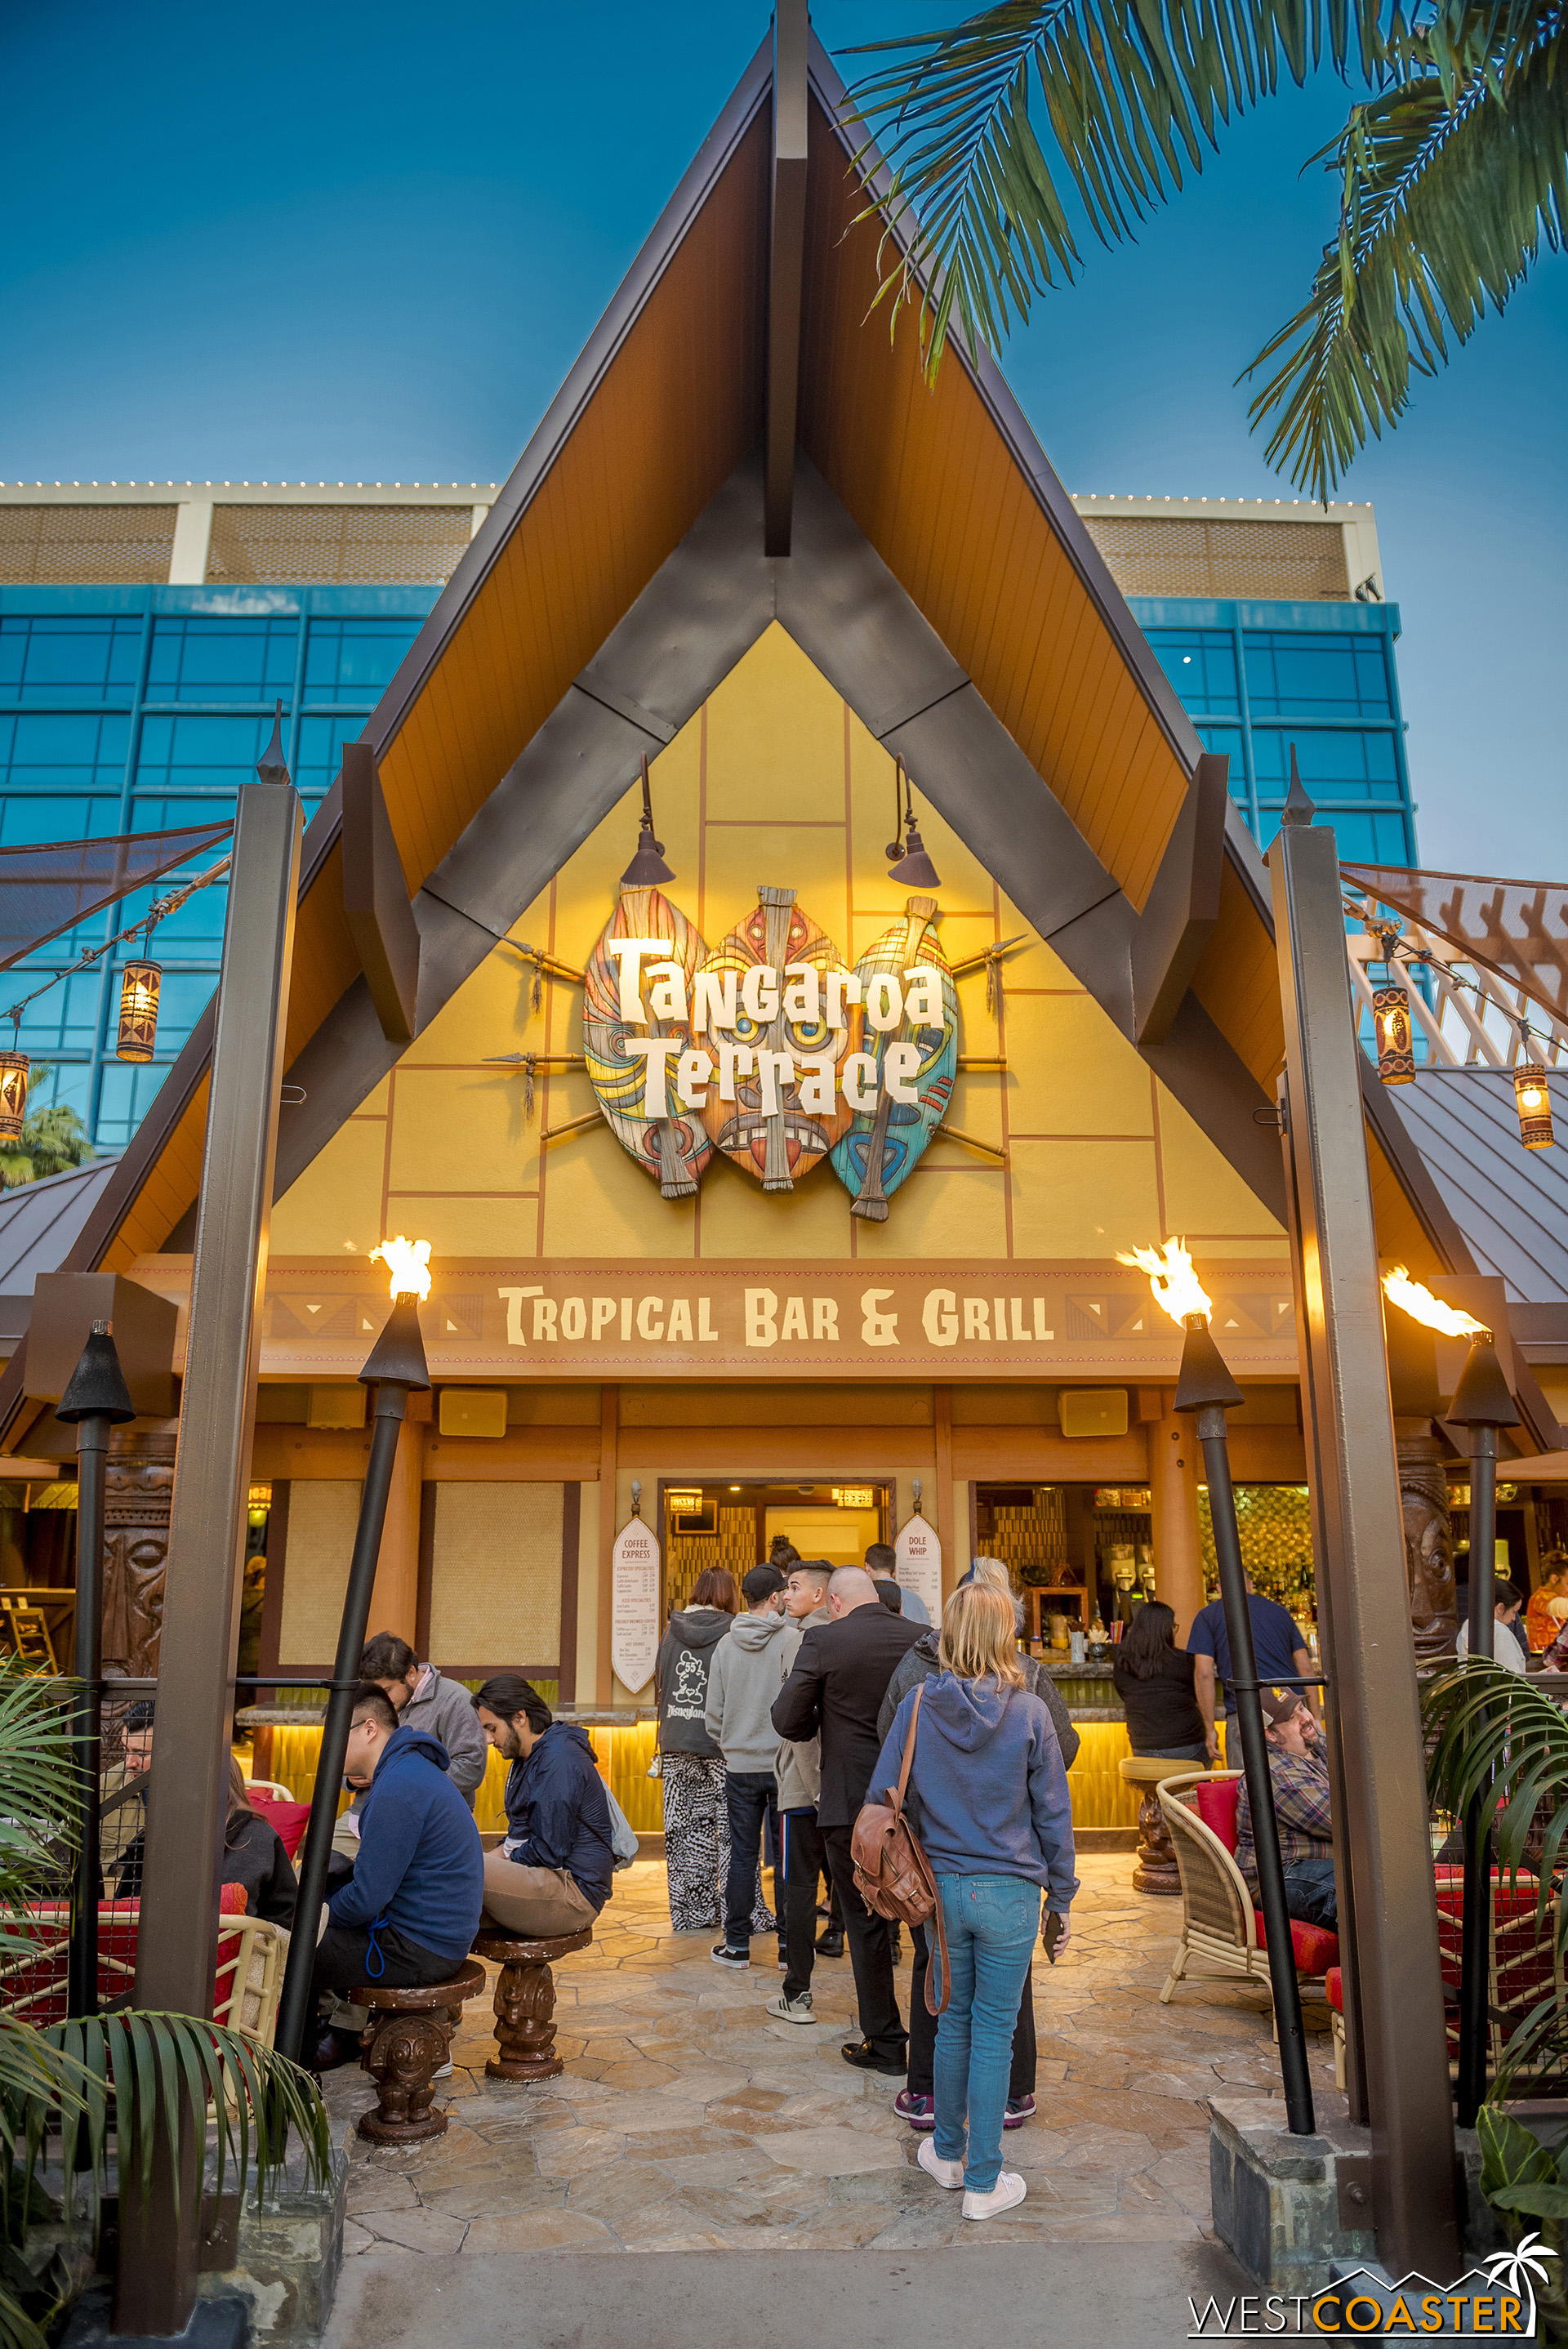  Tangaroa Terrace has attracted some good crowds since its reopening early last month. 